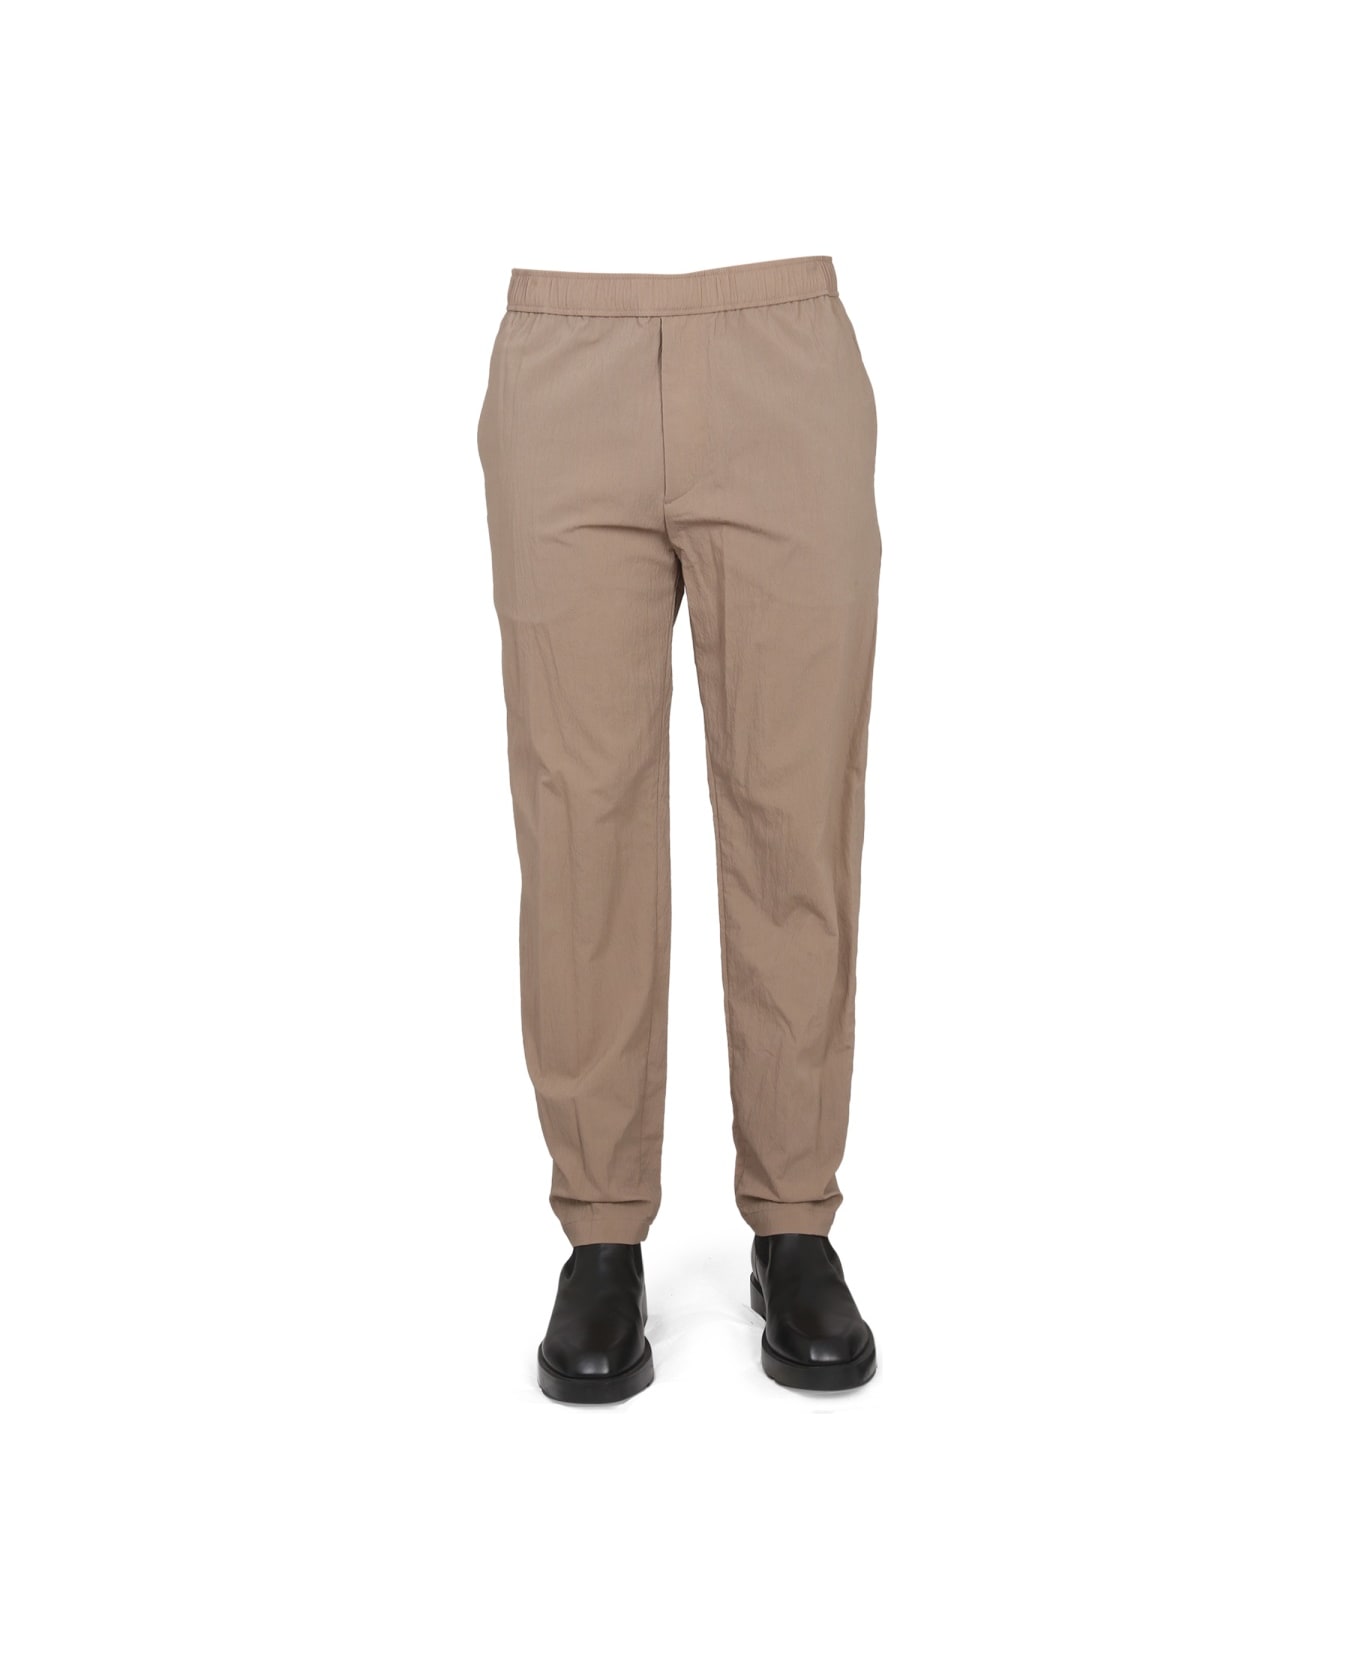 Theory Graham Kelso Pants - BEIGE ボトムス